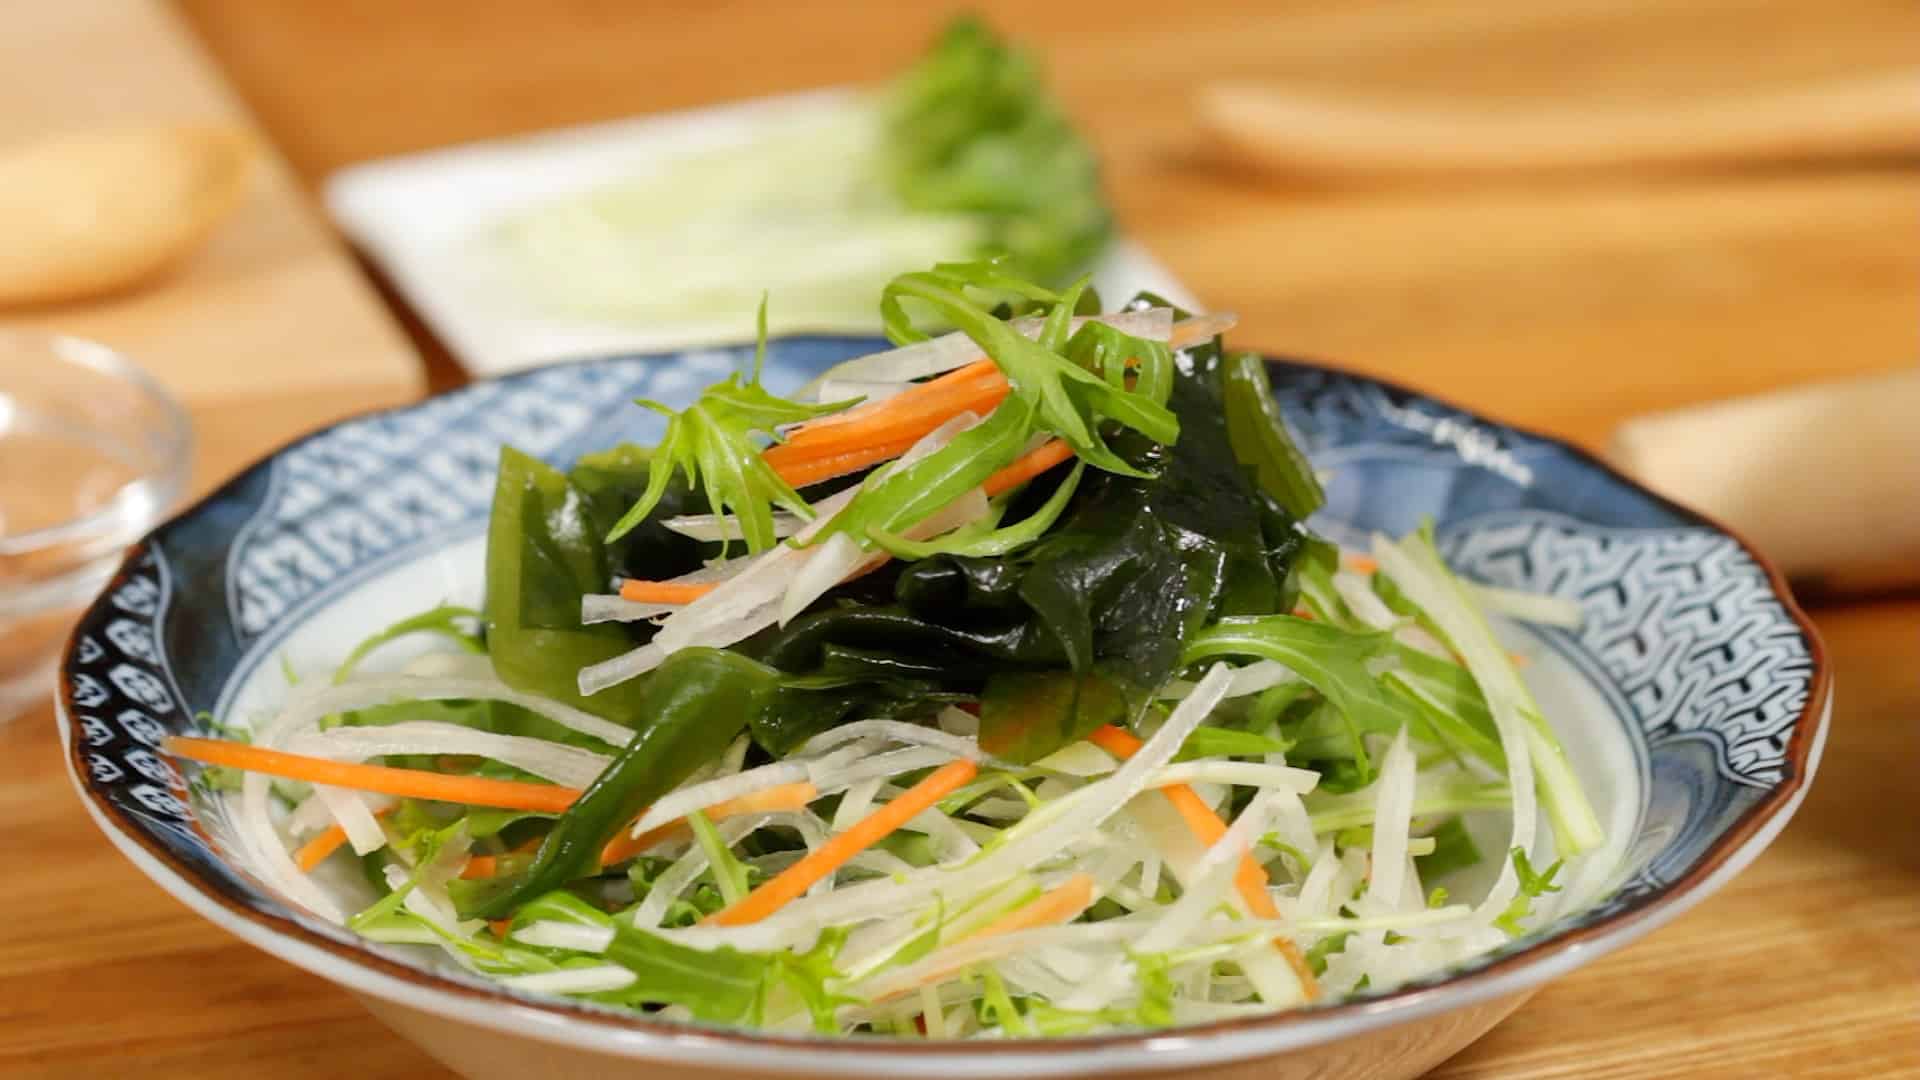 Seaweed Salad with Japanese-style Dressing Recipe (Nutritious Wakame Salad)  - Cooking with Dog